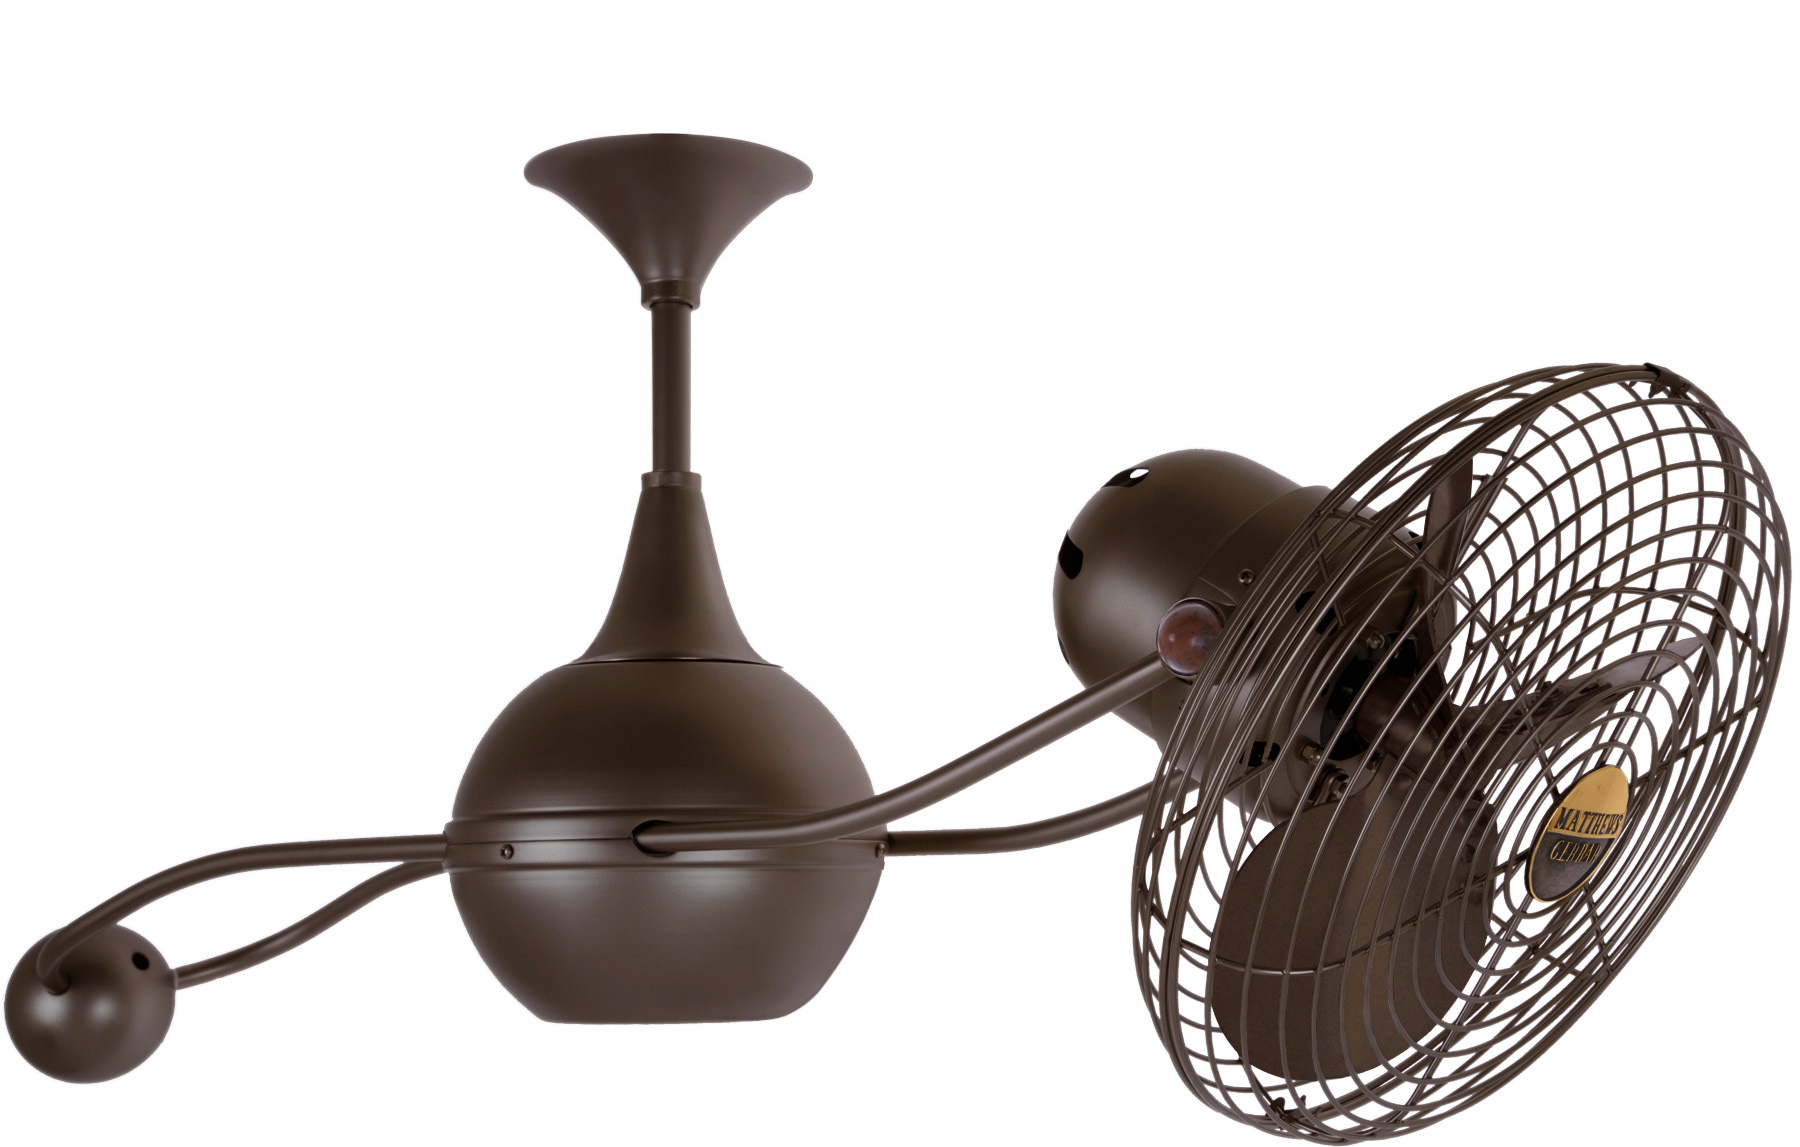 Brisa 2000 ceiling fan in Bronzette finish with Metal Blades mad